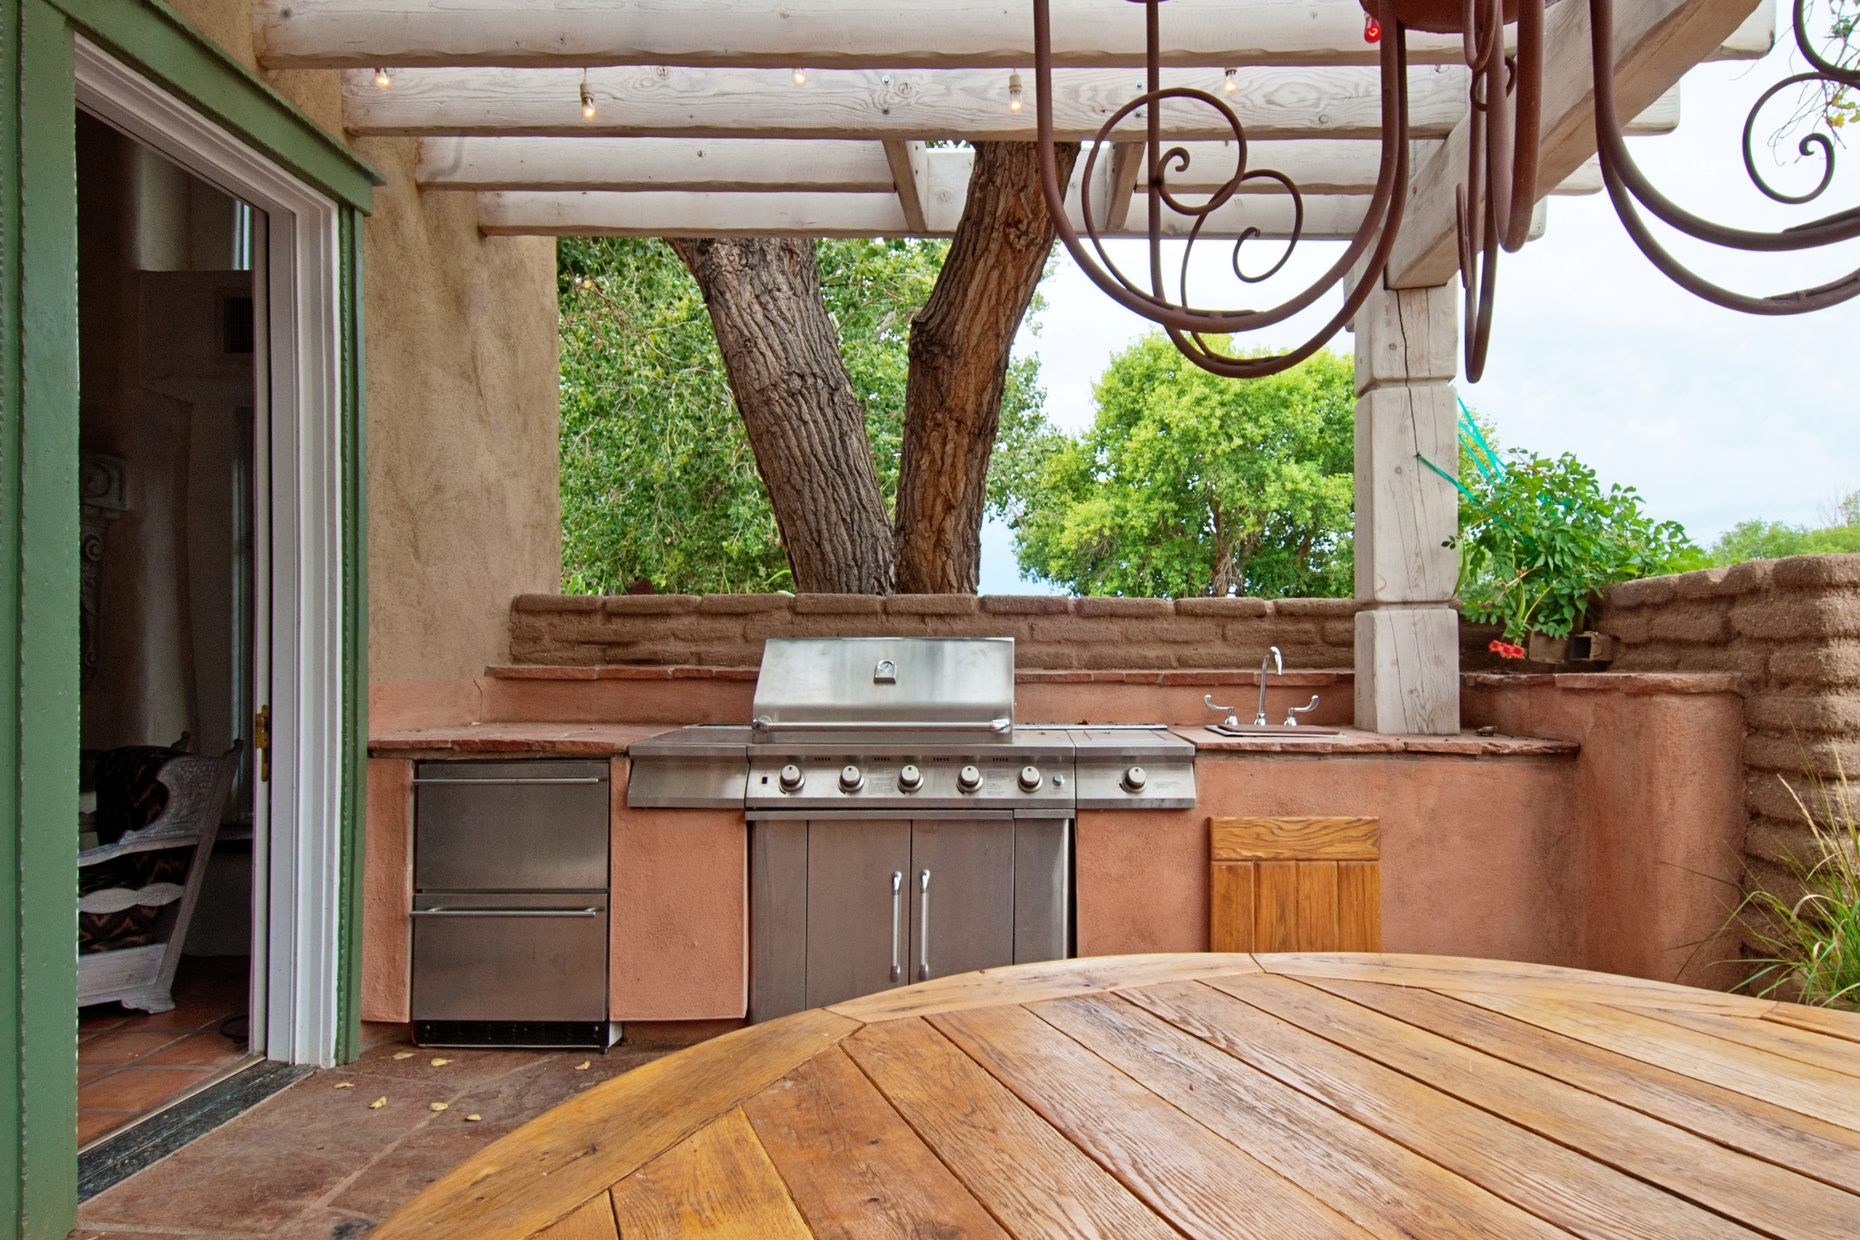 Outdoors Kitchen with Built-In gas grill on a deck